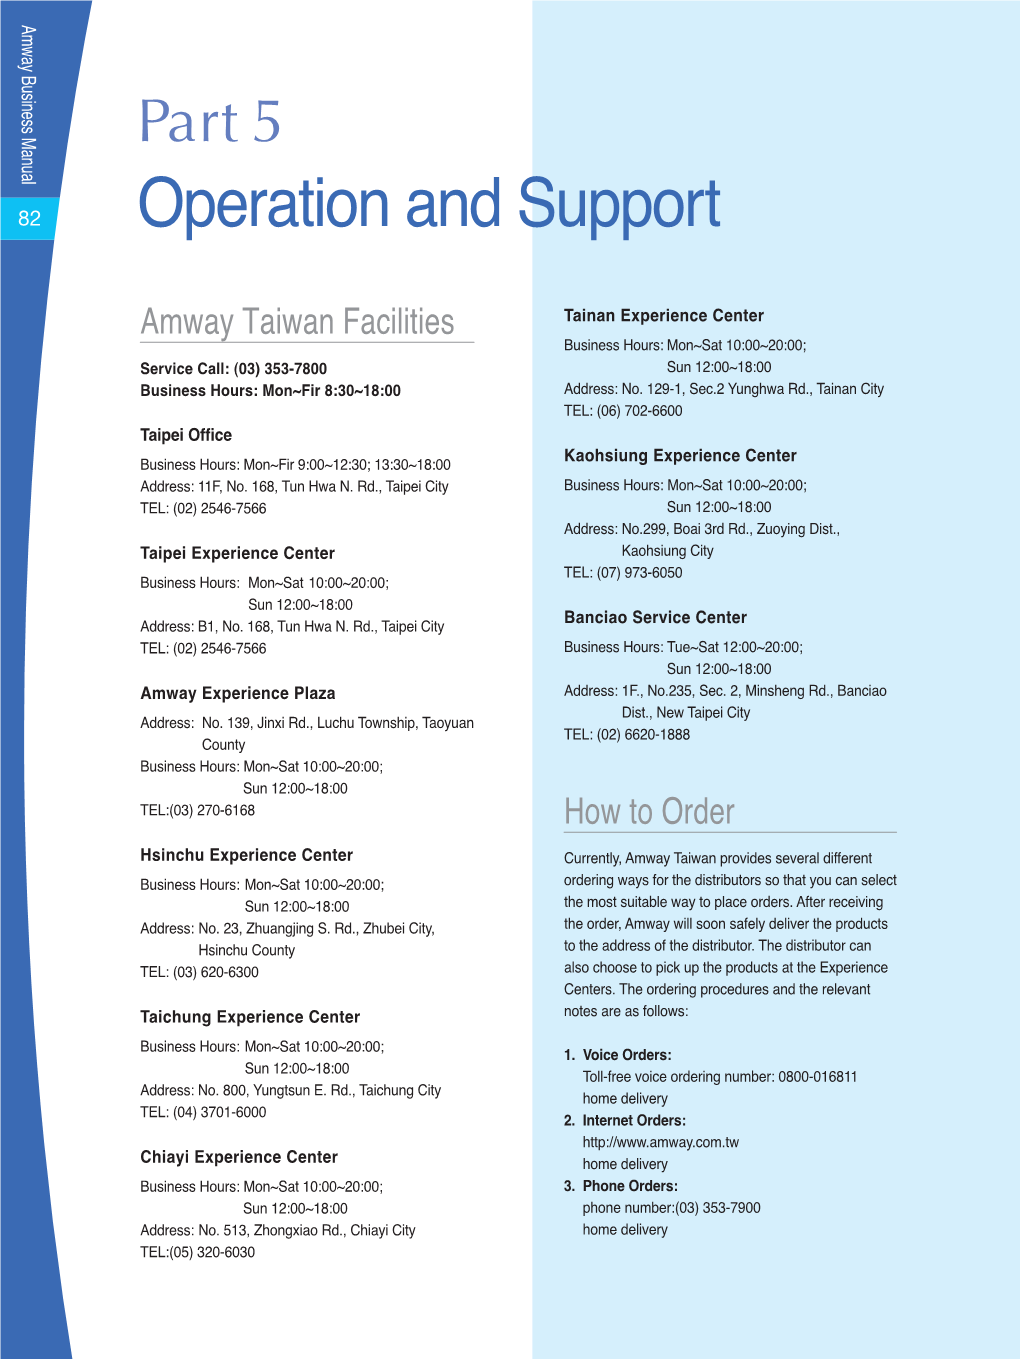 Operation and Support